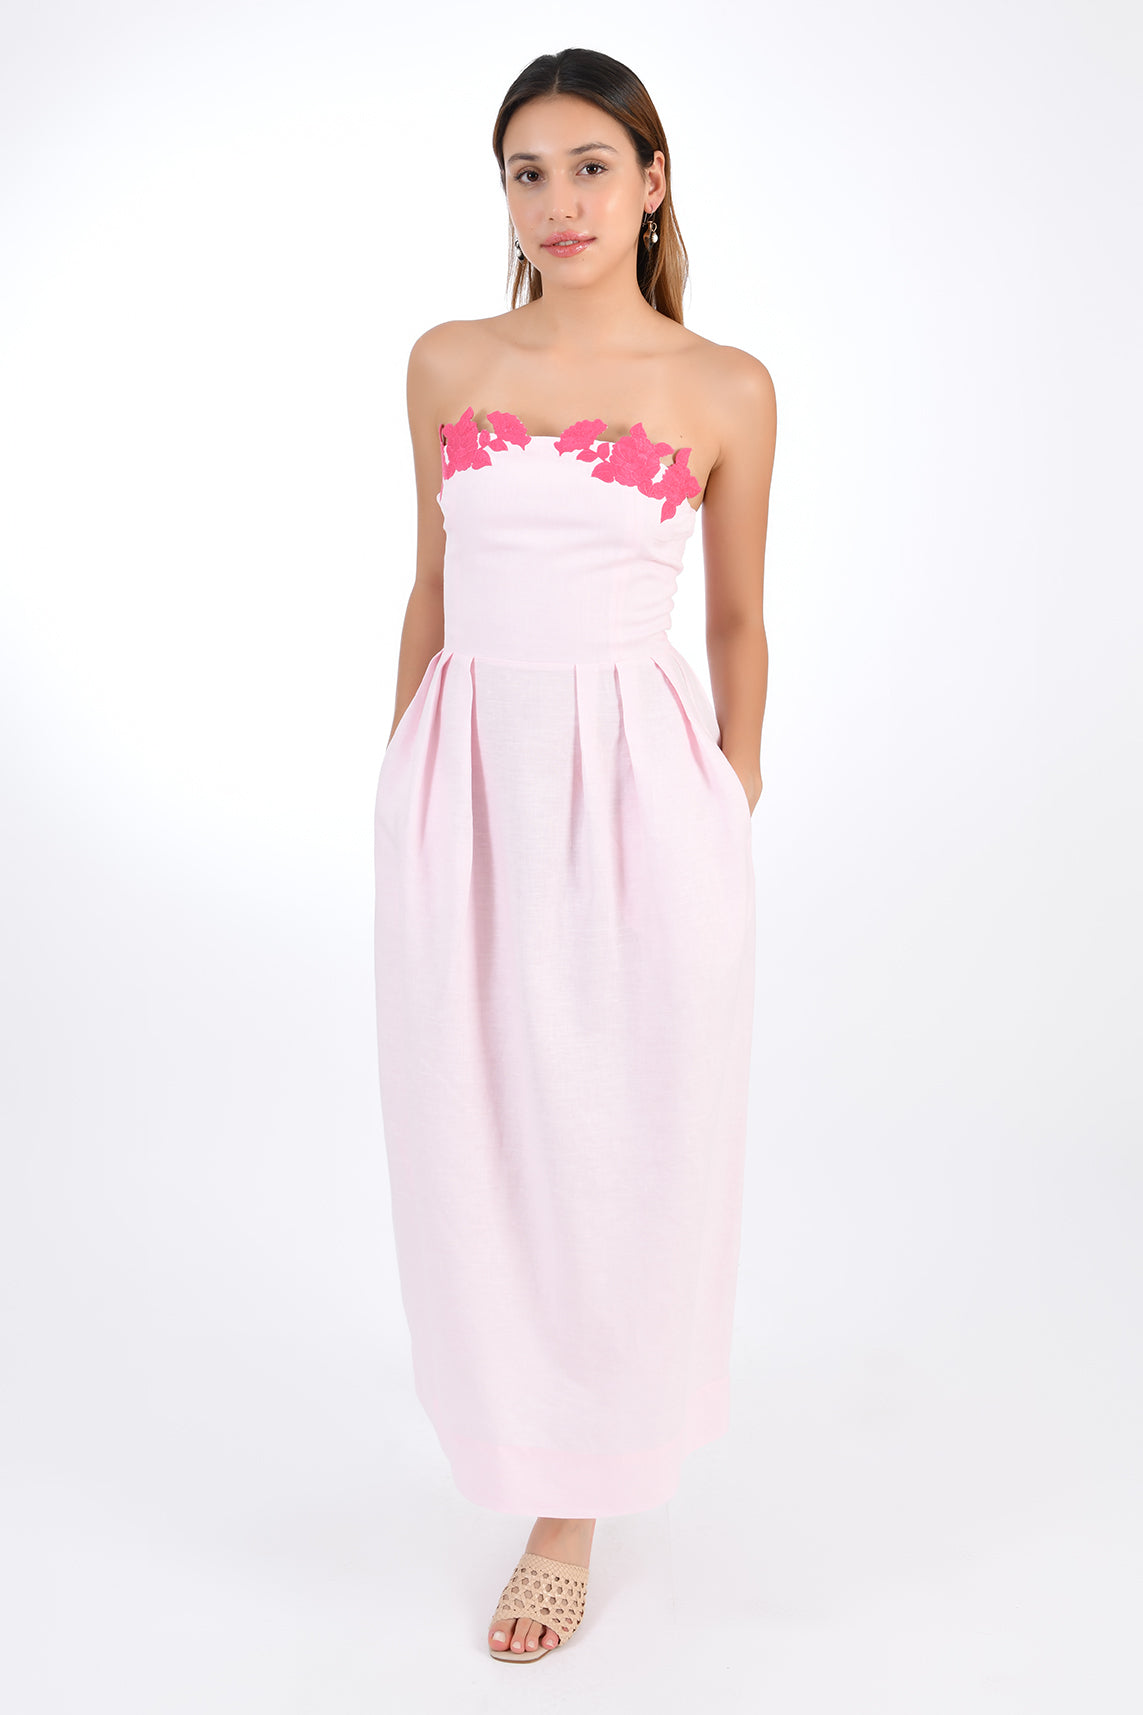 Fanm Mon Linen Lorr Midi Dress in Light pink, showcasing hand-embroidered floral appliques in harmonizing hues along the neckline. Front View.